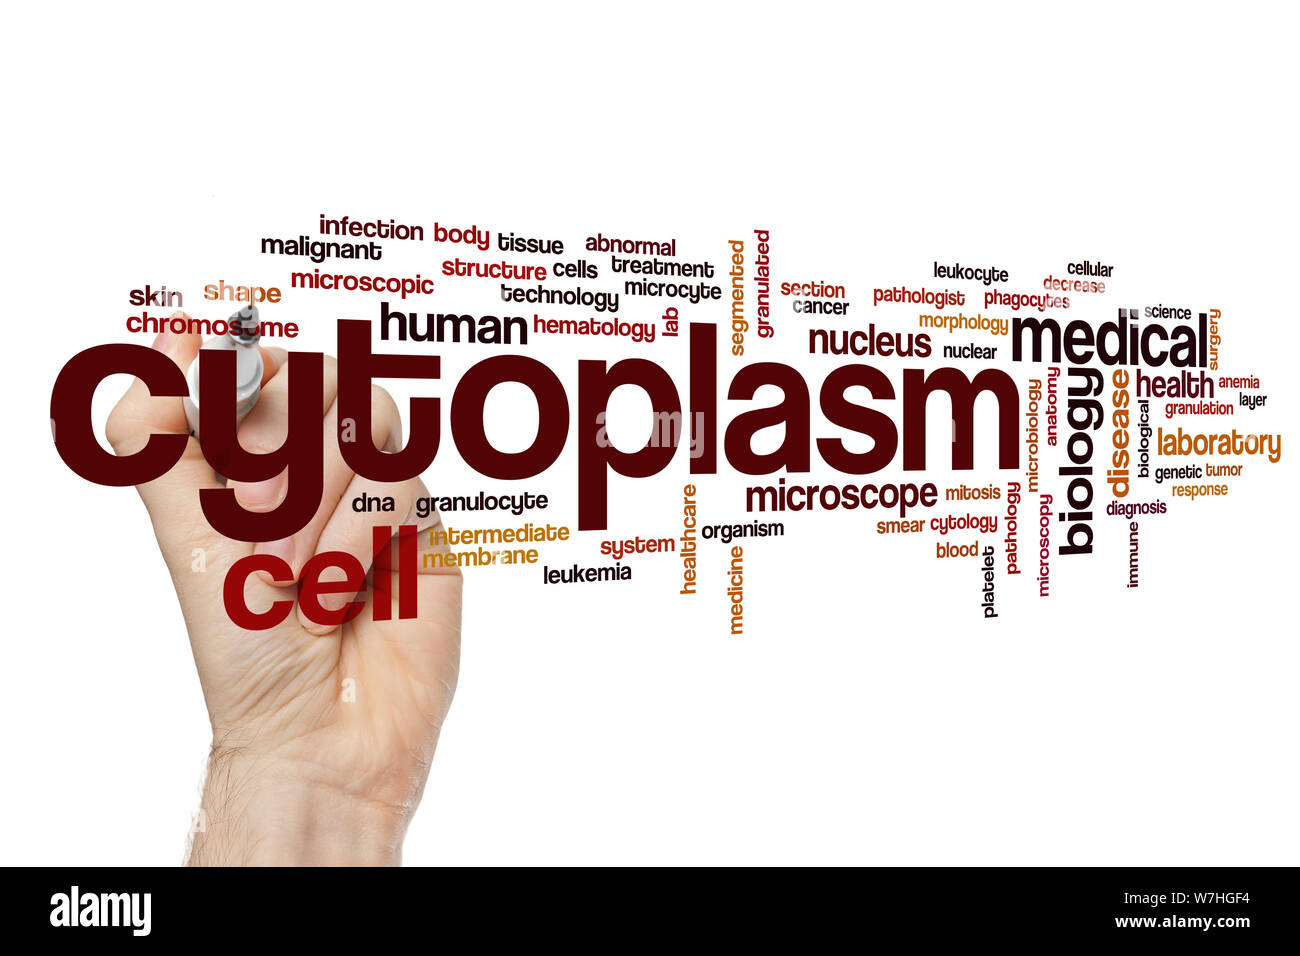 Cytoplasm word cloud concept Stock Photo